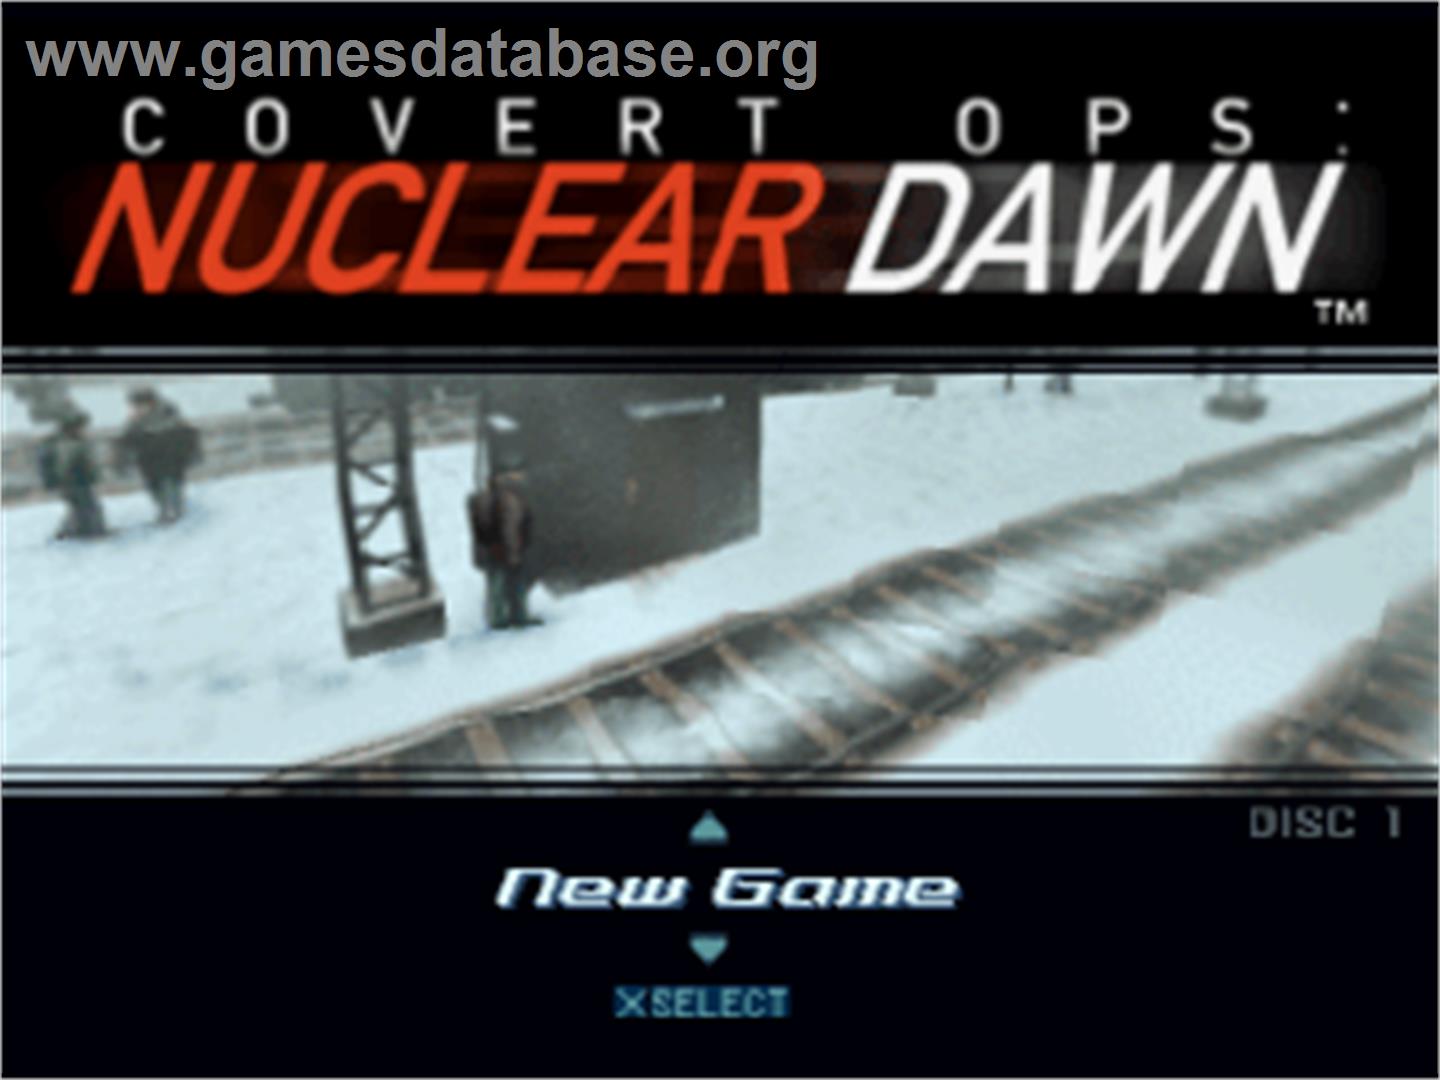 Covert Ops: Nuclear Dawn - Sony Playstation - Artwork - Title Screen